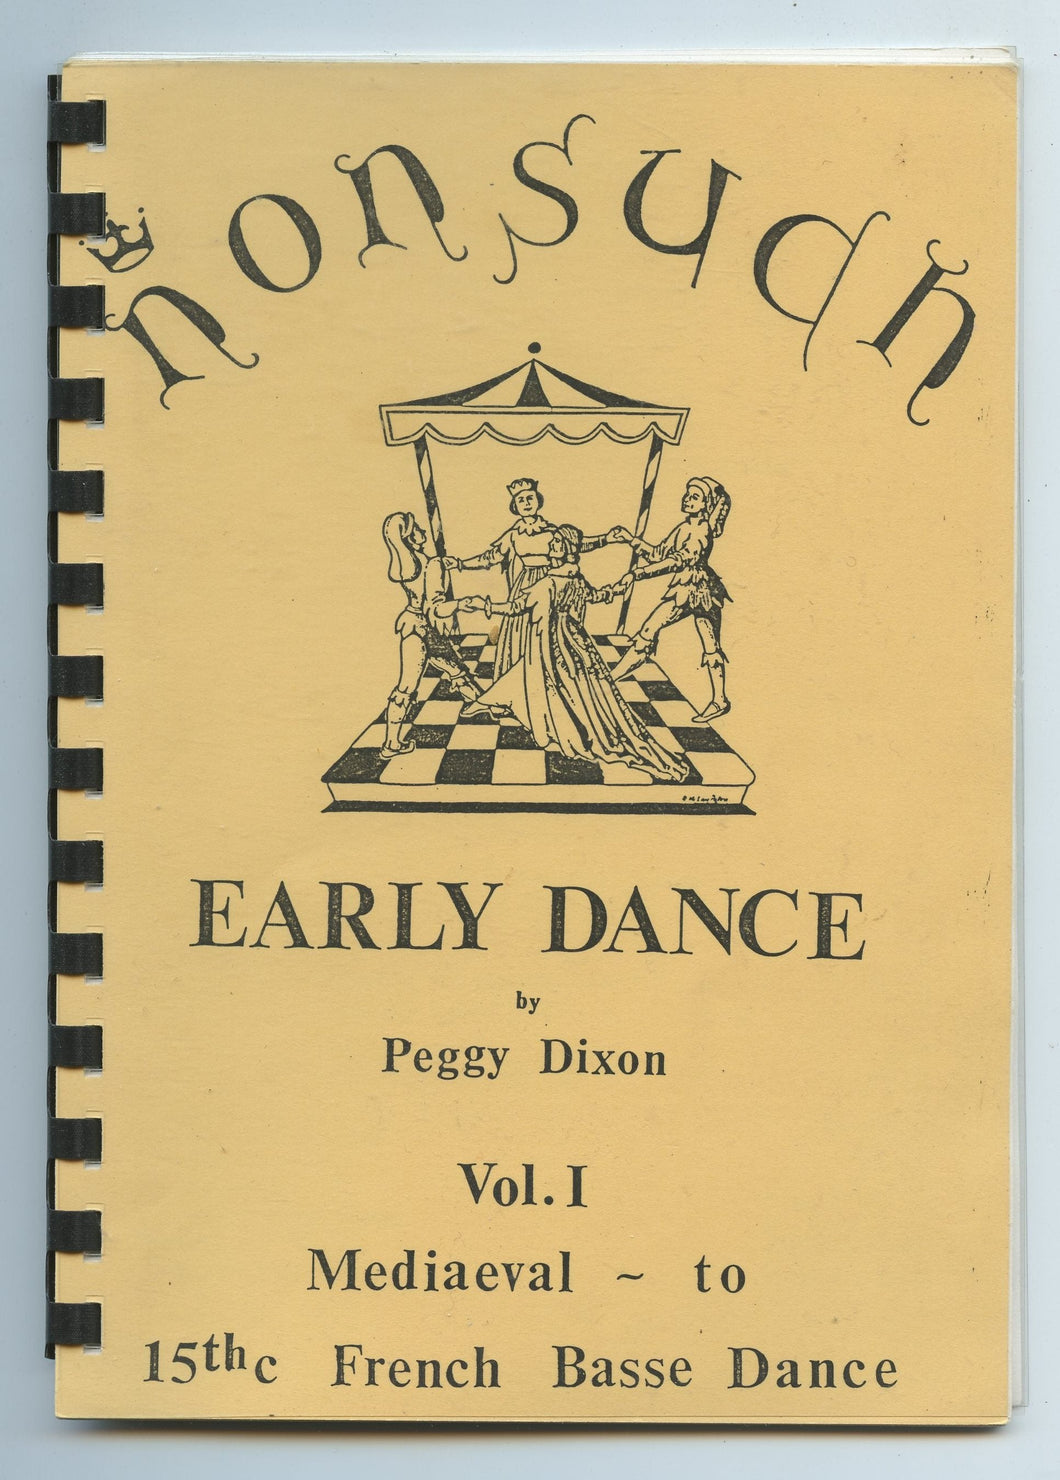 Nonsuch: Early Dance. Vol. I Mediaeval to 15th French Basse Dance